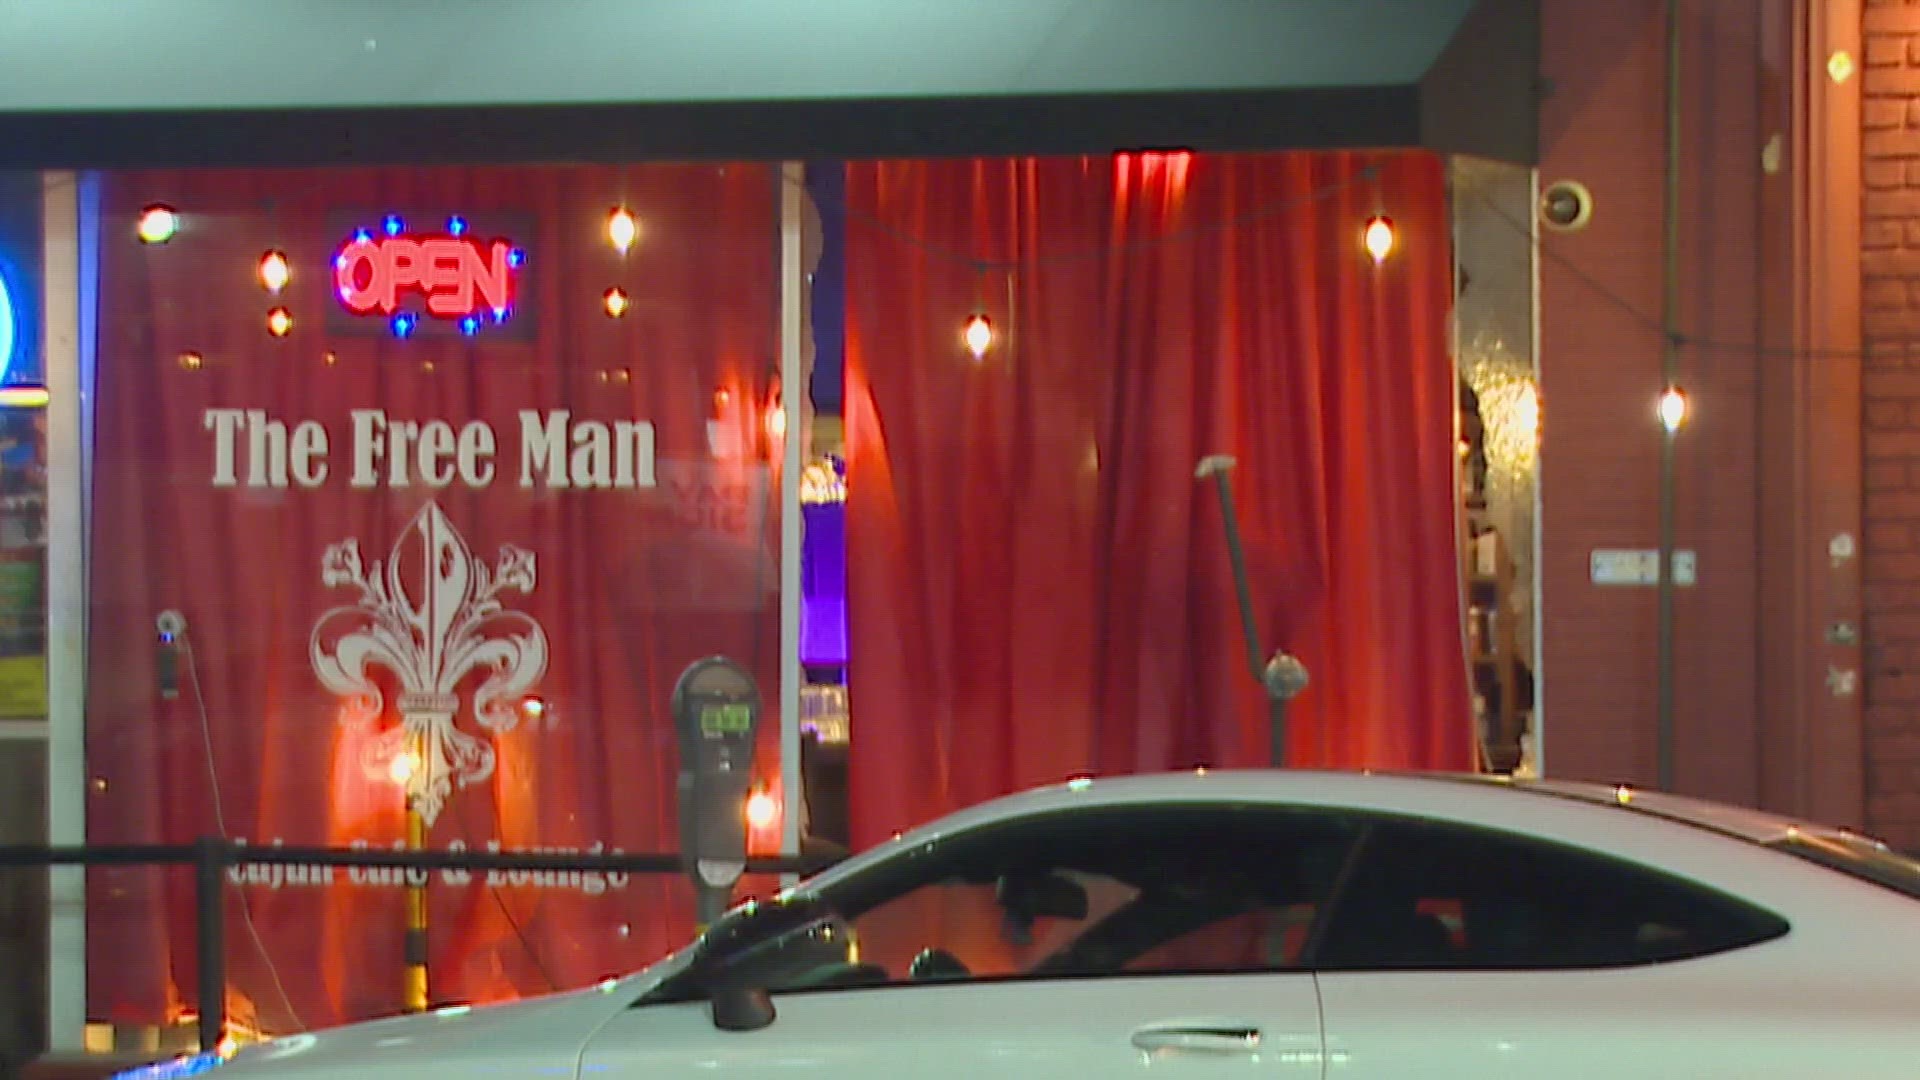 Two arrests have been made in the shooting outside Free Man bar that injured an employee in February.